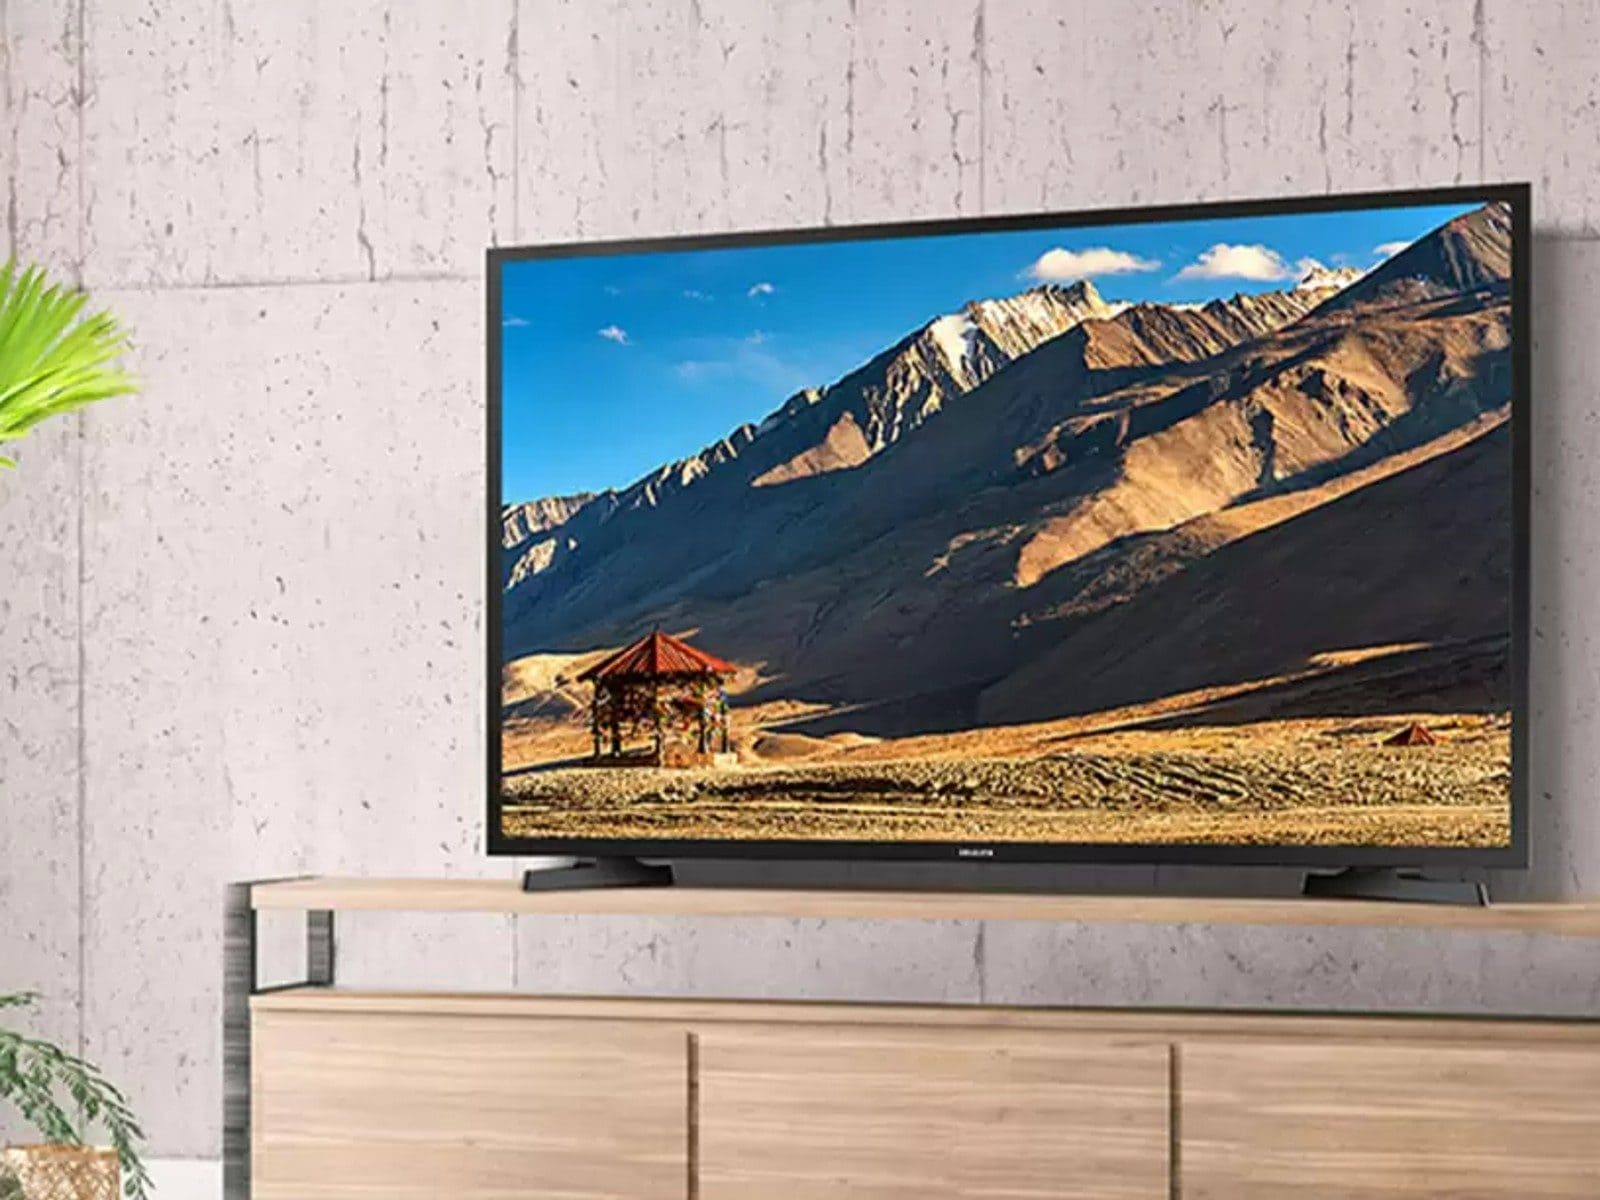 Samsung Launches TV In India With Mode And TV Channels: Price, Features - News18